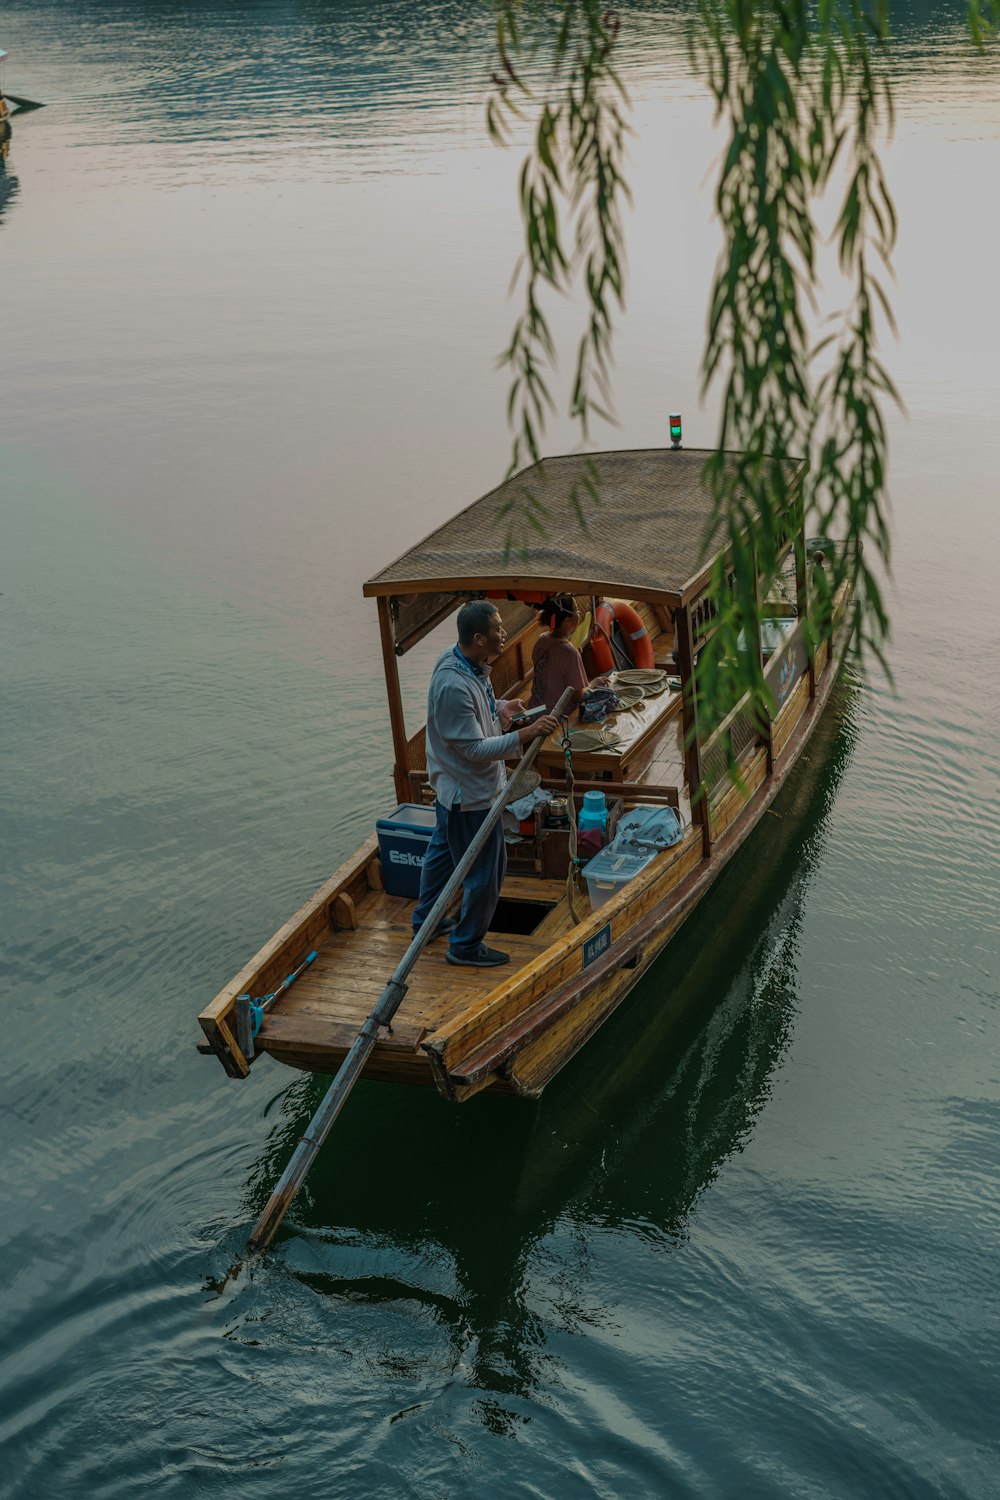 a man on a small boat in a body of water